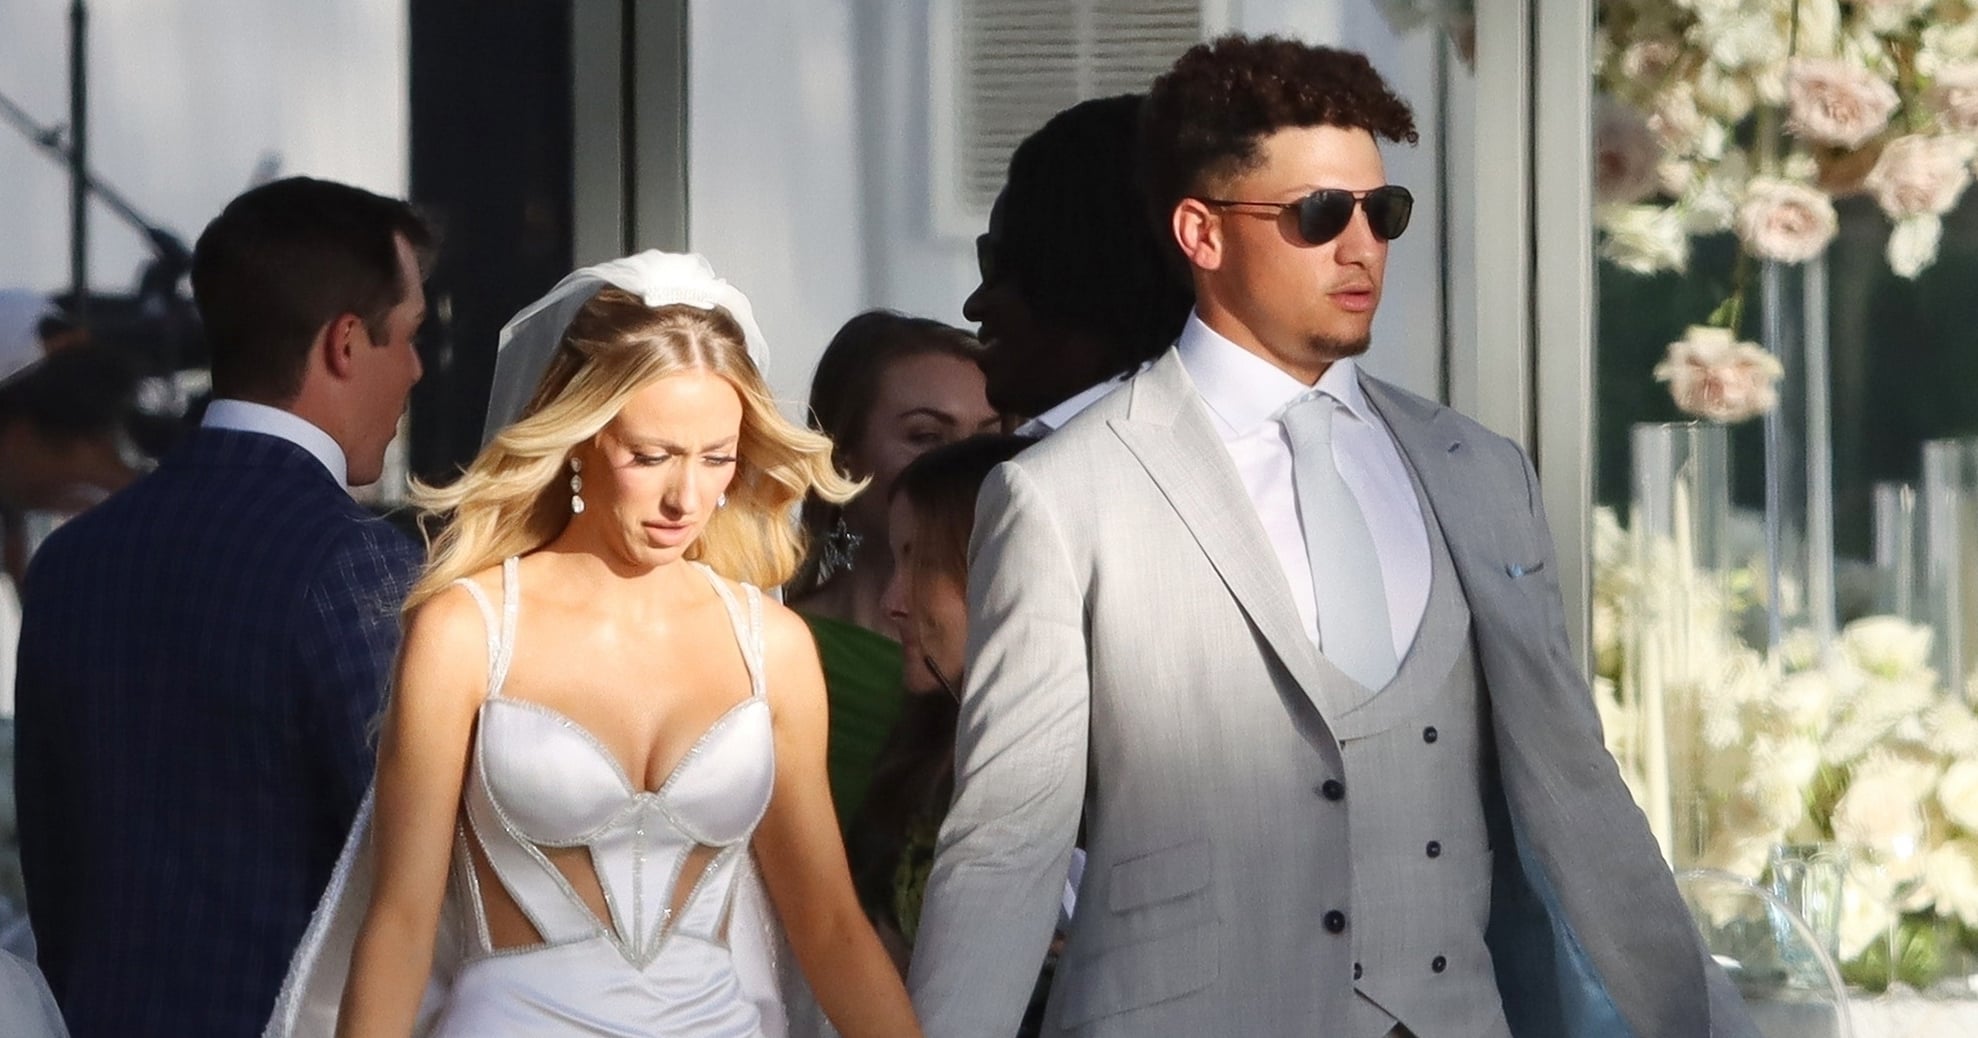 Patrick Mahomes and Brittany Matthews are married